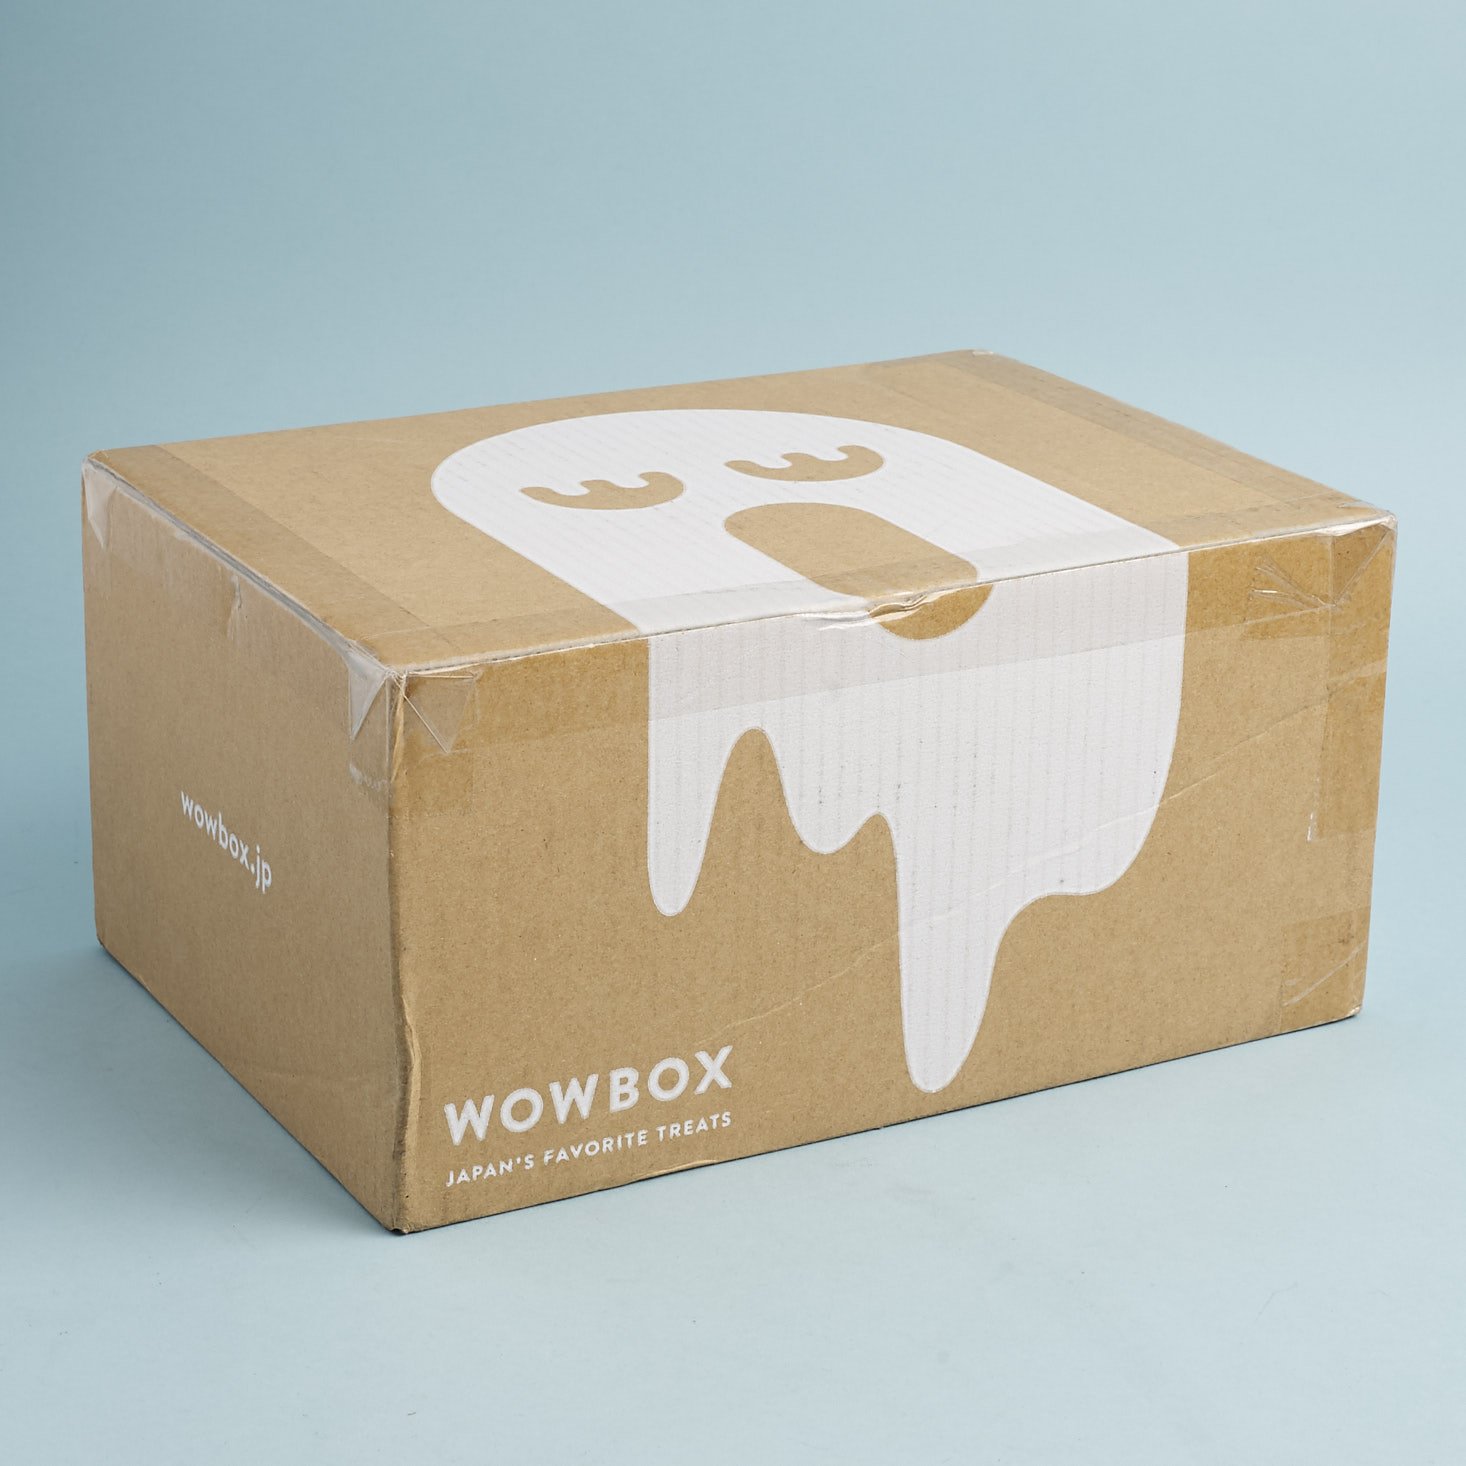 WOWBOX New & Limited Box Review + Exclusive Coupon – August 2017